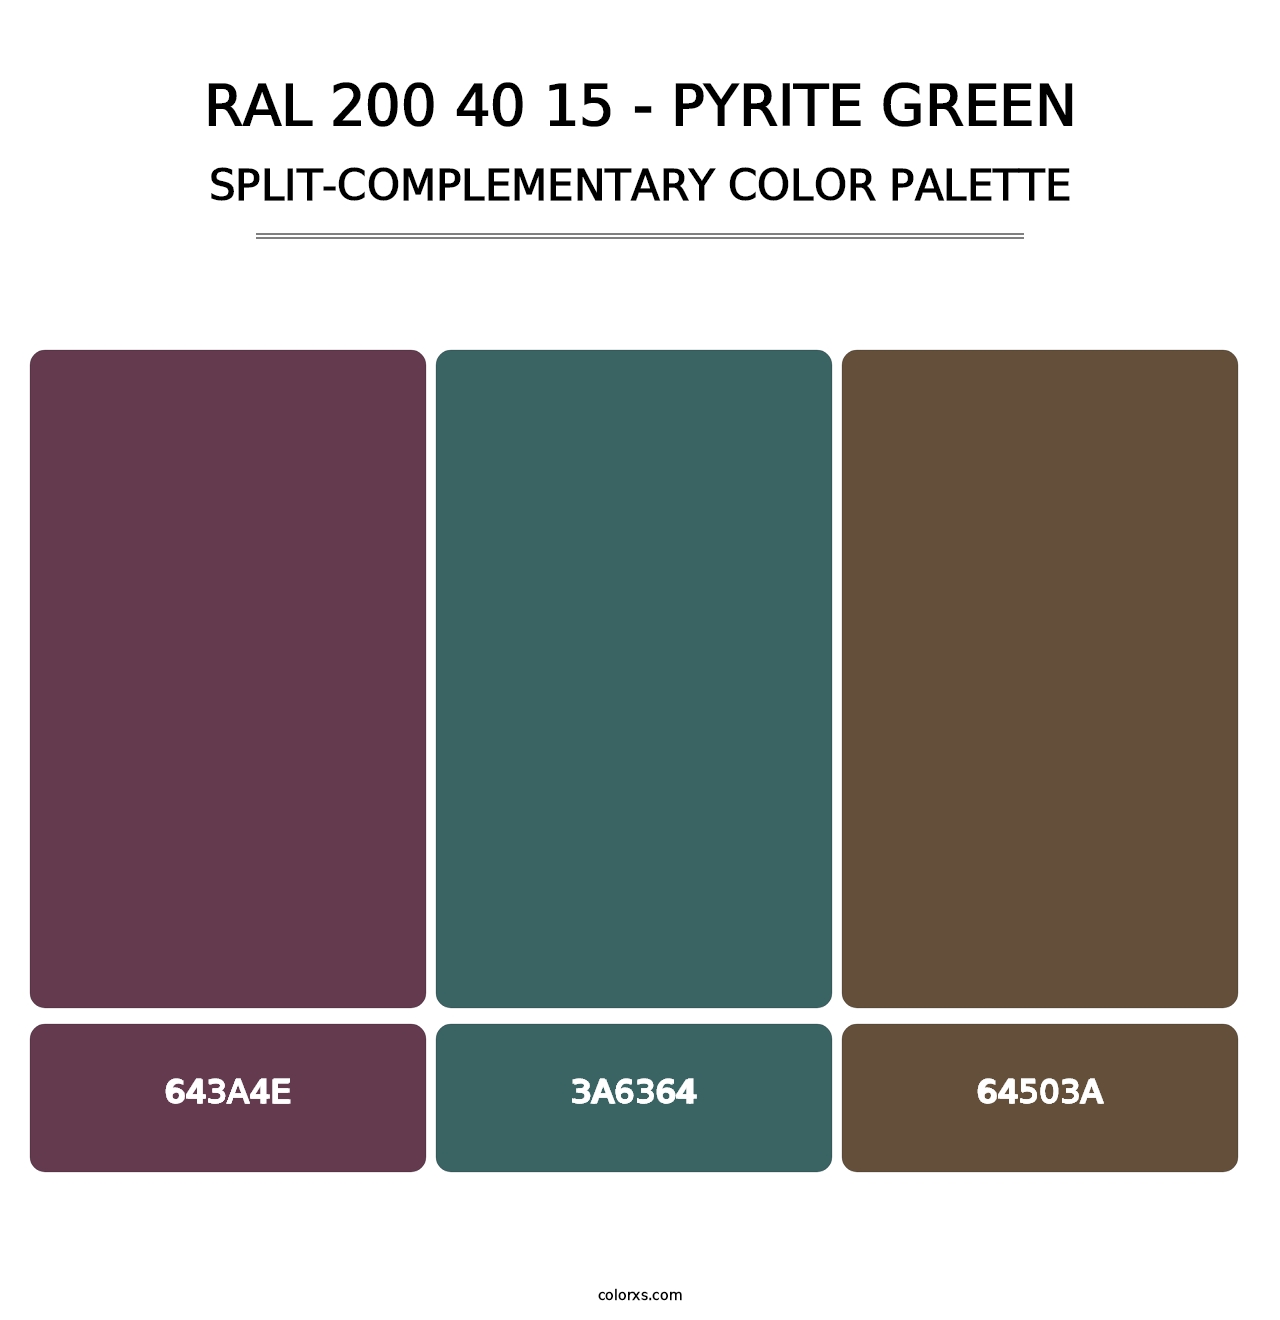 RAL 200 40 15 - Pyrite Green - Split-Complementary Color Palette